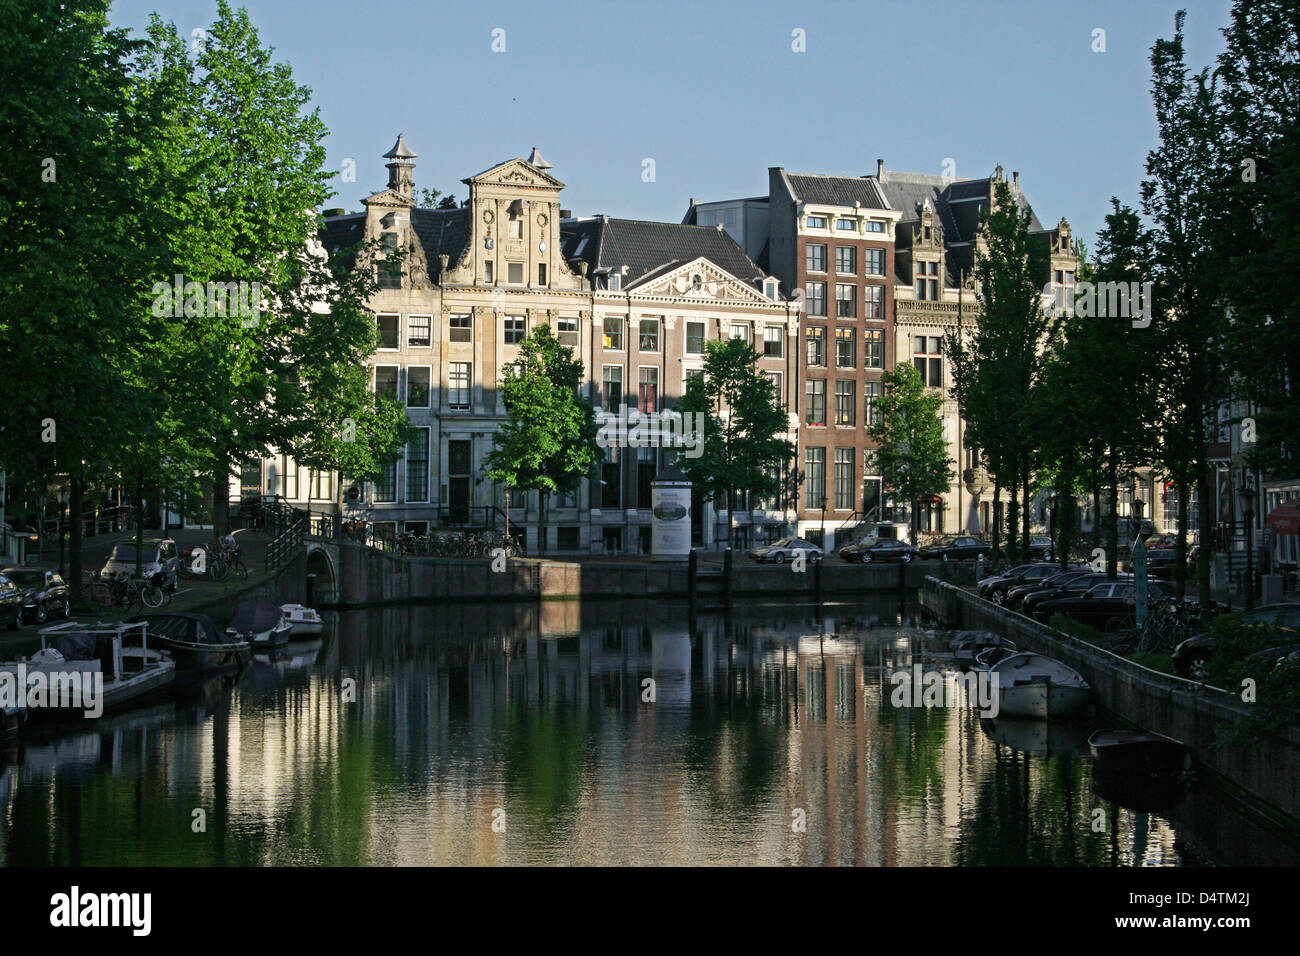 The Netherlands Holland Amsterdam Herengracht 386-388 Canal District Construction year 1665 Architecture Dutch Baroque Stock Photo